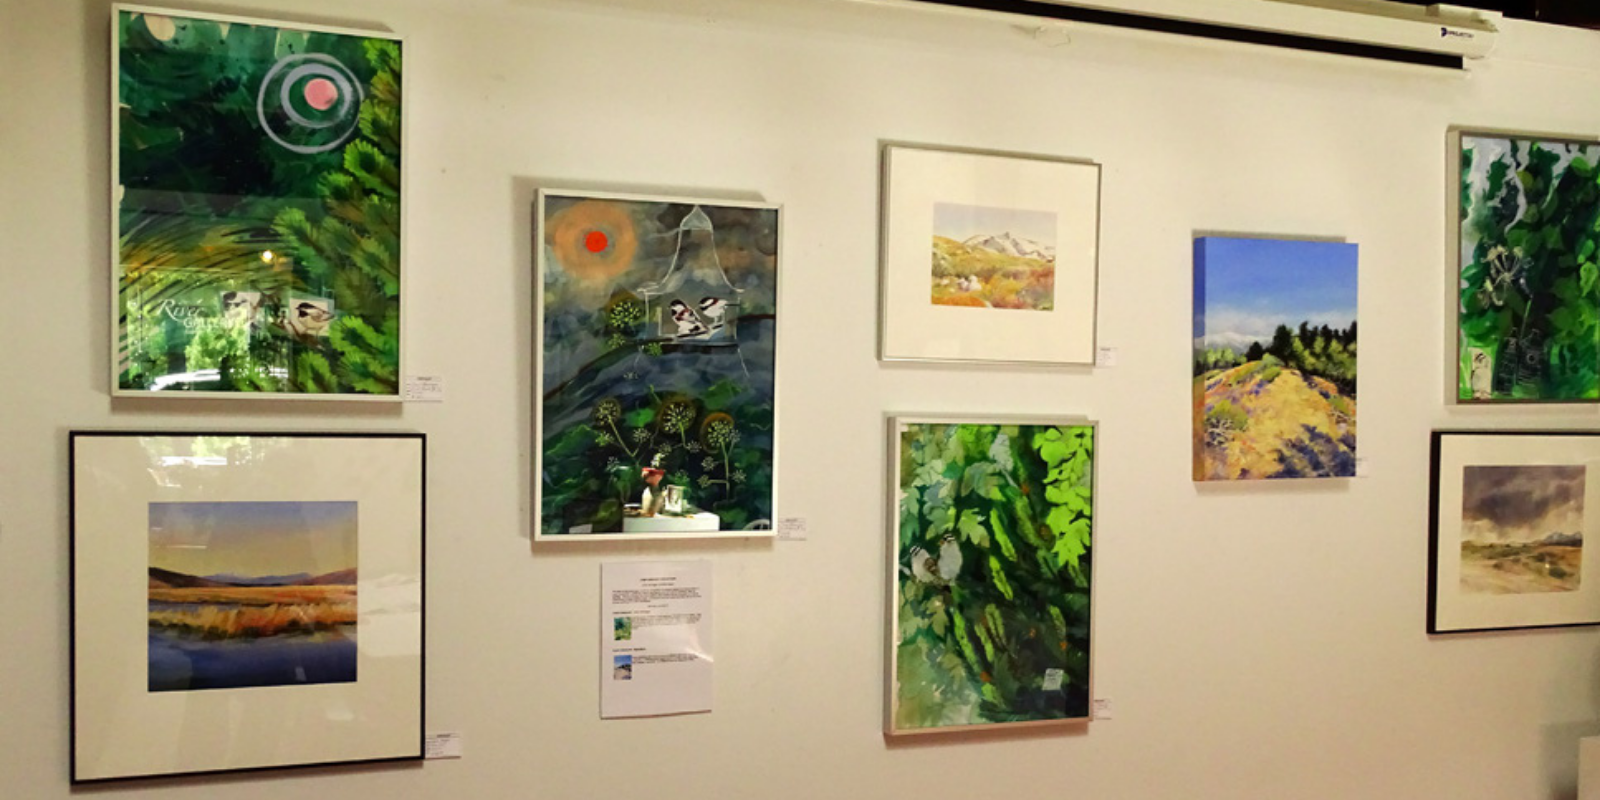 Art displayed on the walls at River Gallery